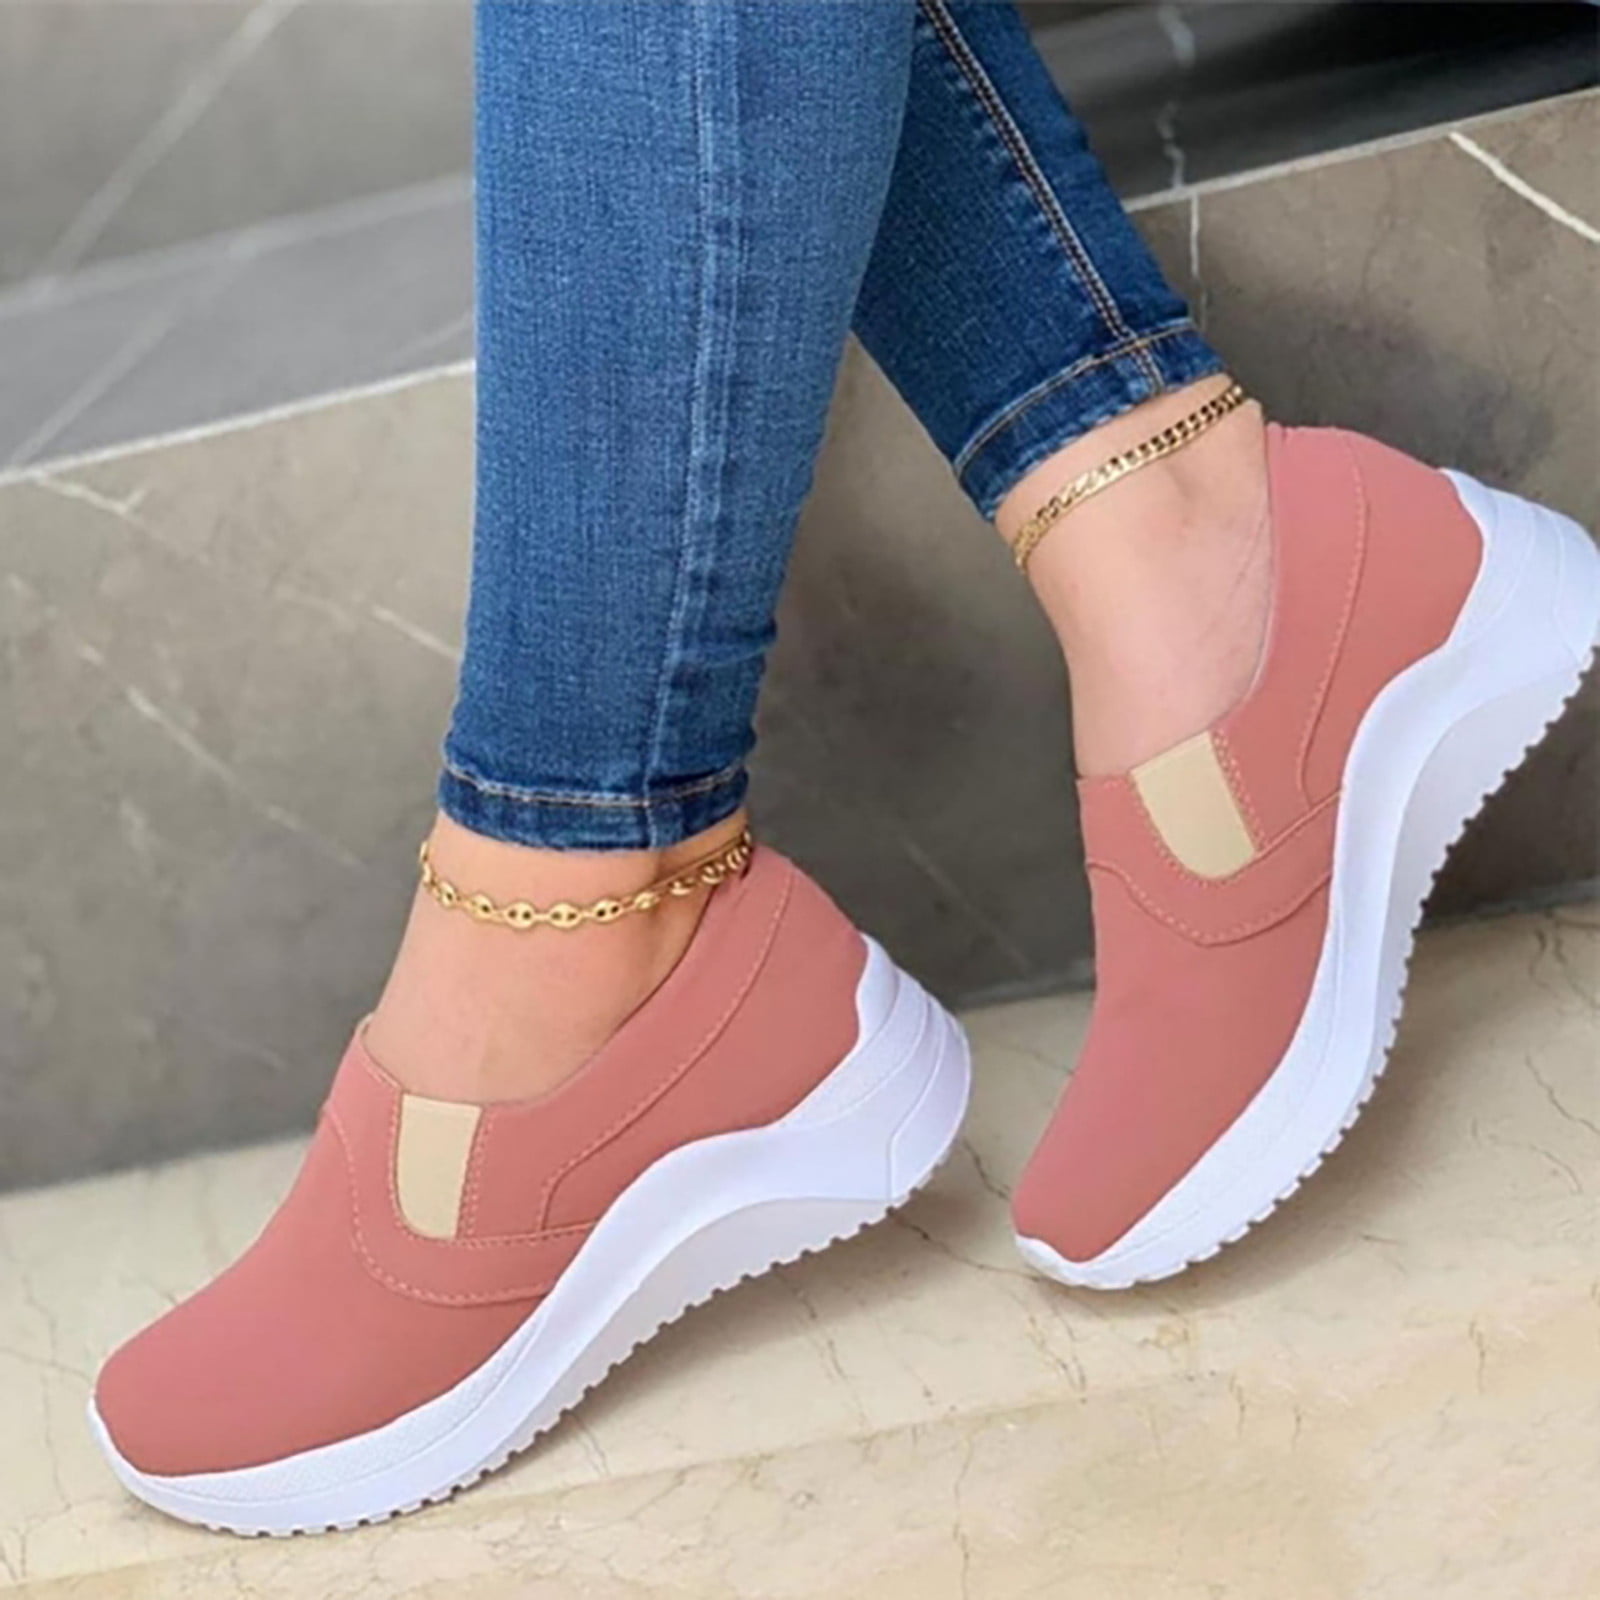 somiliss Chunky Sneakers Women High Top Lace Up India | Ubuy